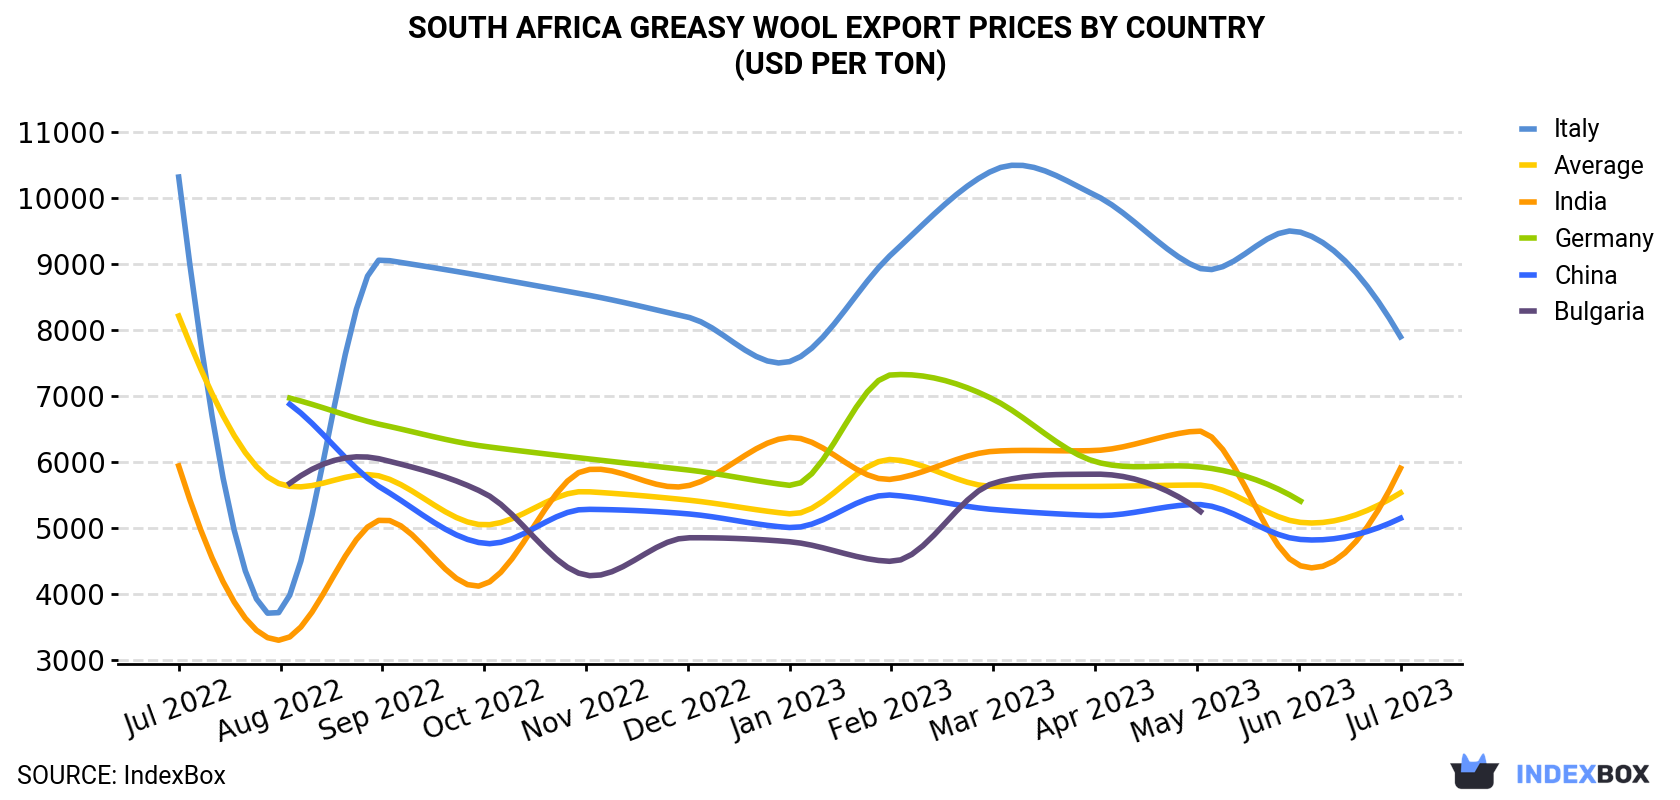 South Africa Greasy Wool Export Prices By Country (USD Per Ton)